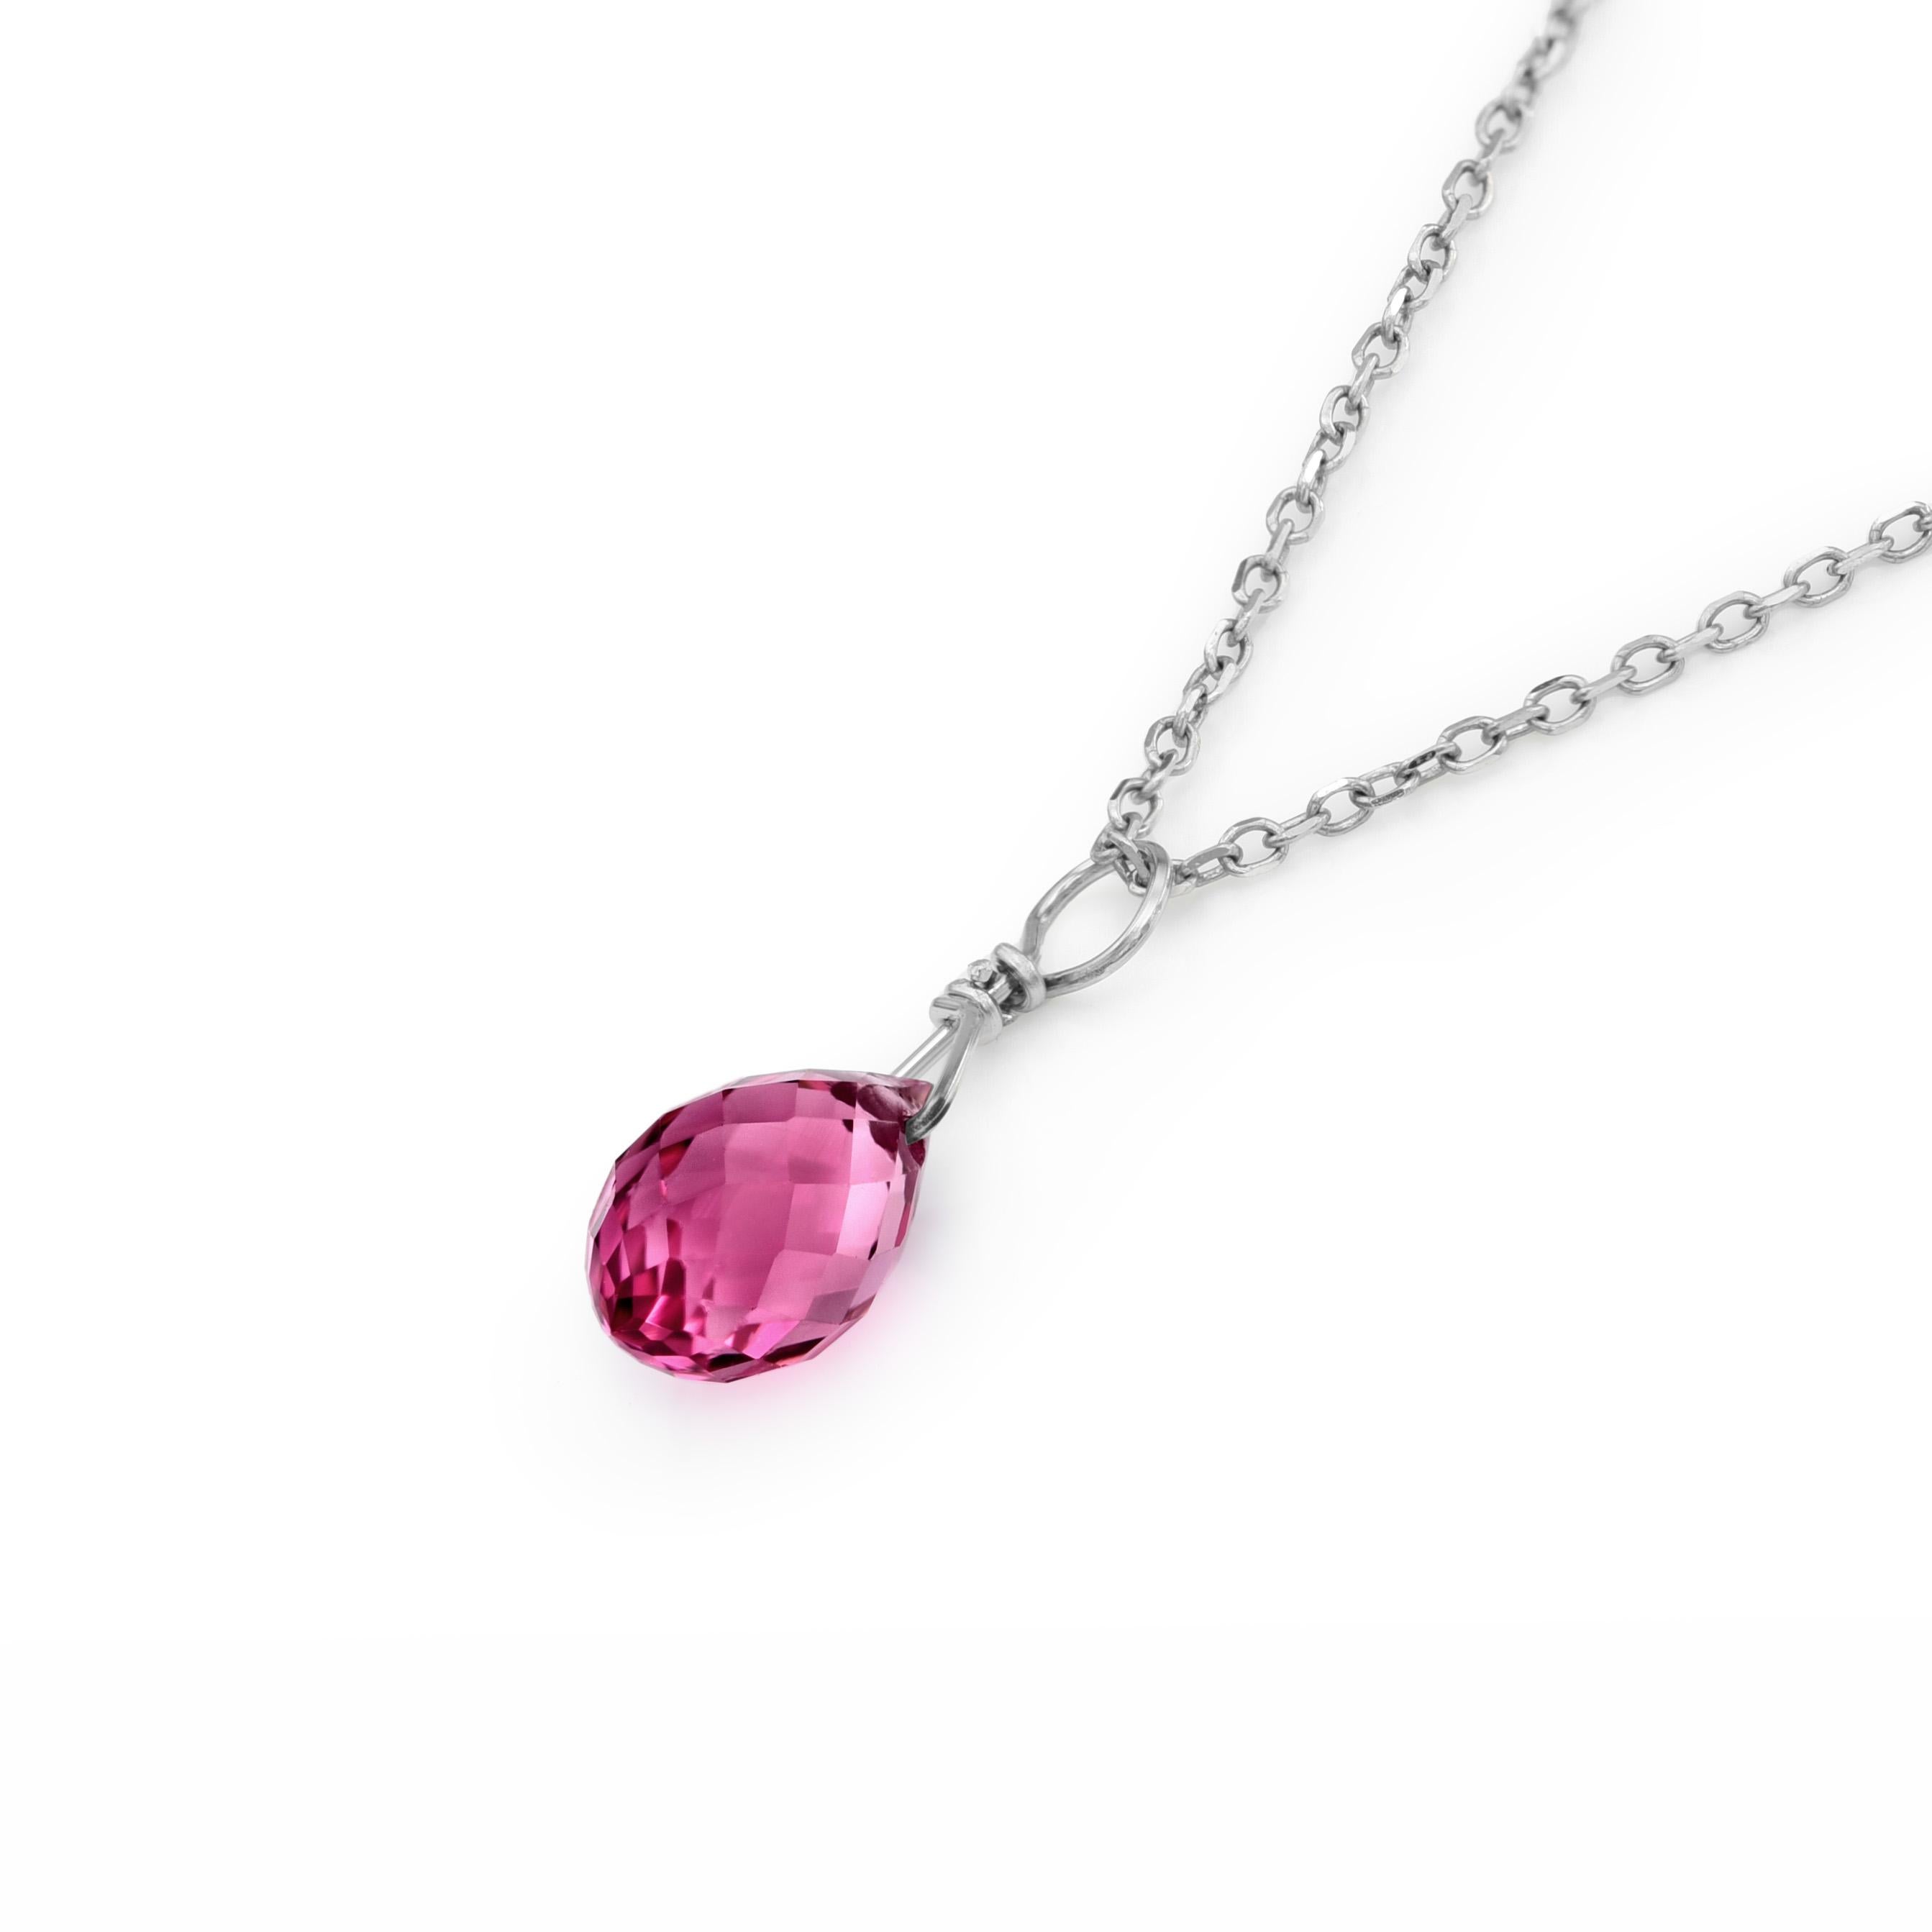 Discover the enchanting elegance of our Pink Tourmaline Pendant, featuring 1.38 carats gem from Brazil. Set in 14K White Gold and accompanied by an 18 inches Spring Chain, this pendant radiates beauty and sophistication. The briolette shape of the